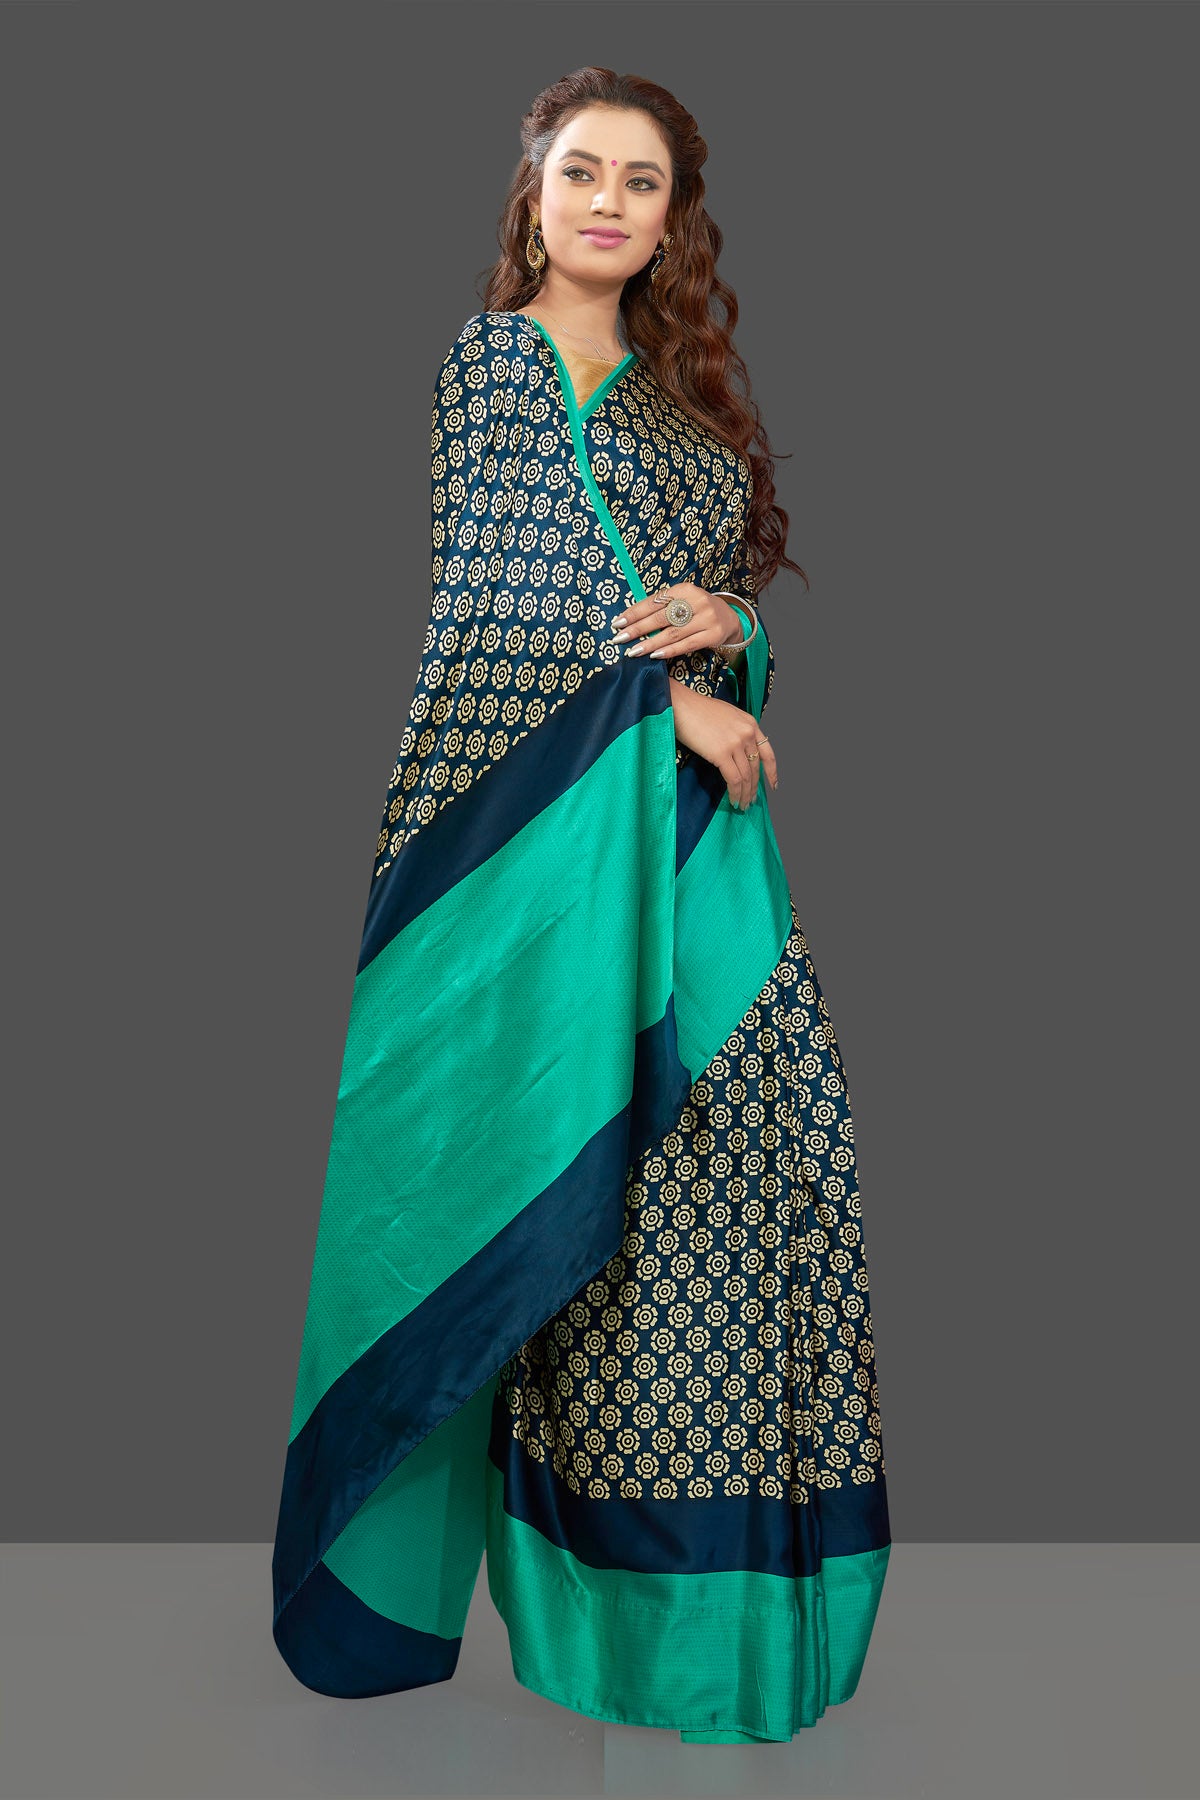 Buy elegant dark blue crepe silk sari online in USA with solid green border. Elevate your Indian style on special occasions in beautiful designer sarees, crepe silk sarees, georgette saris, printed sarees from Pure Elegance Indian clothing store in USA.-full view